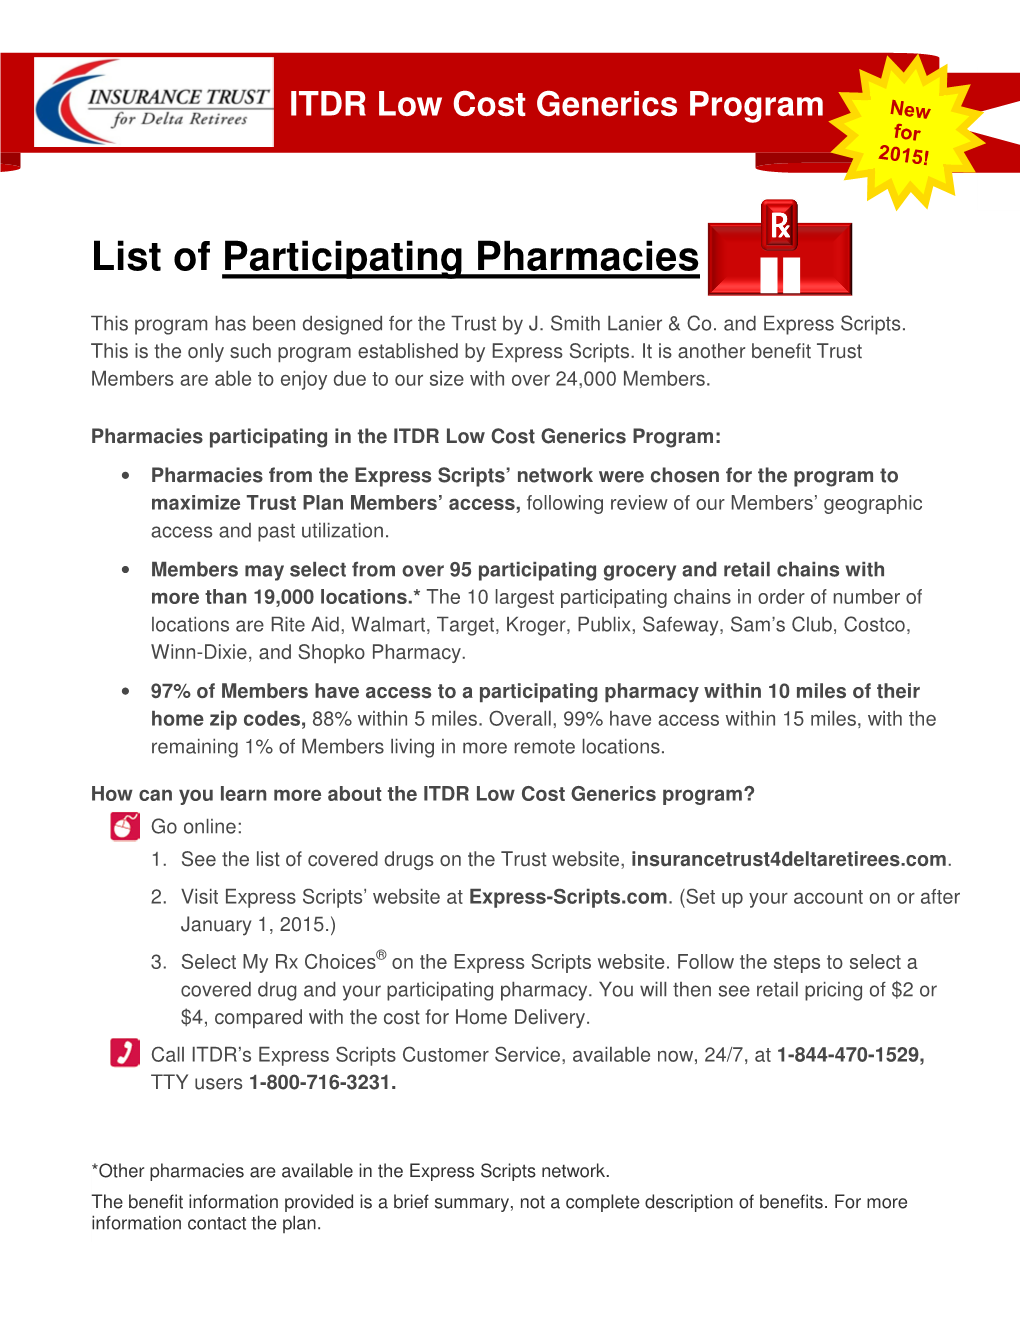 List of Participating Pharmacies